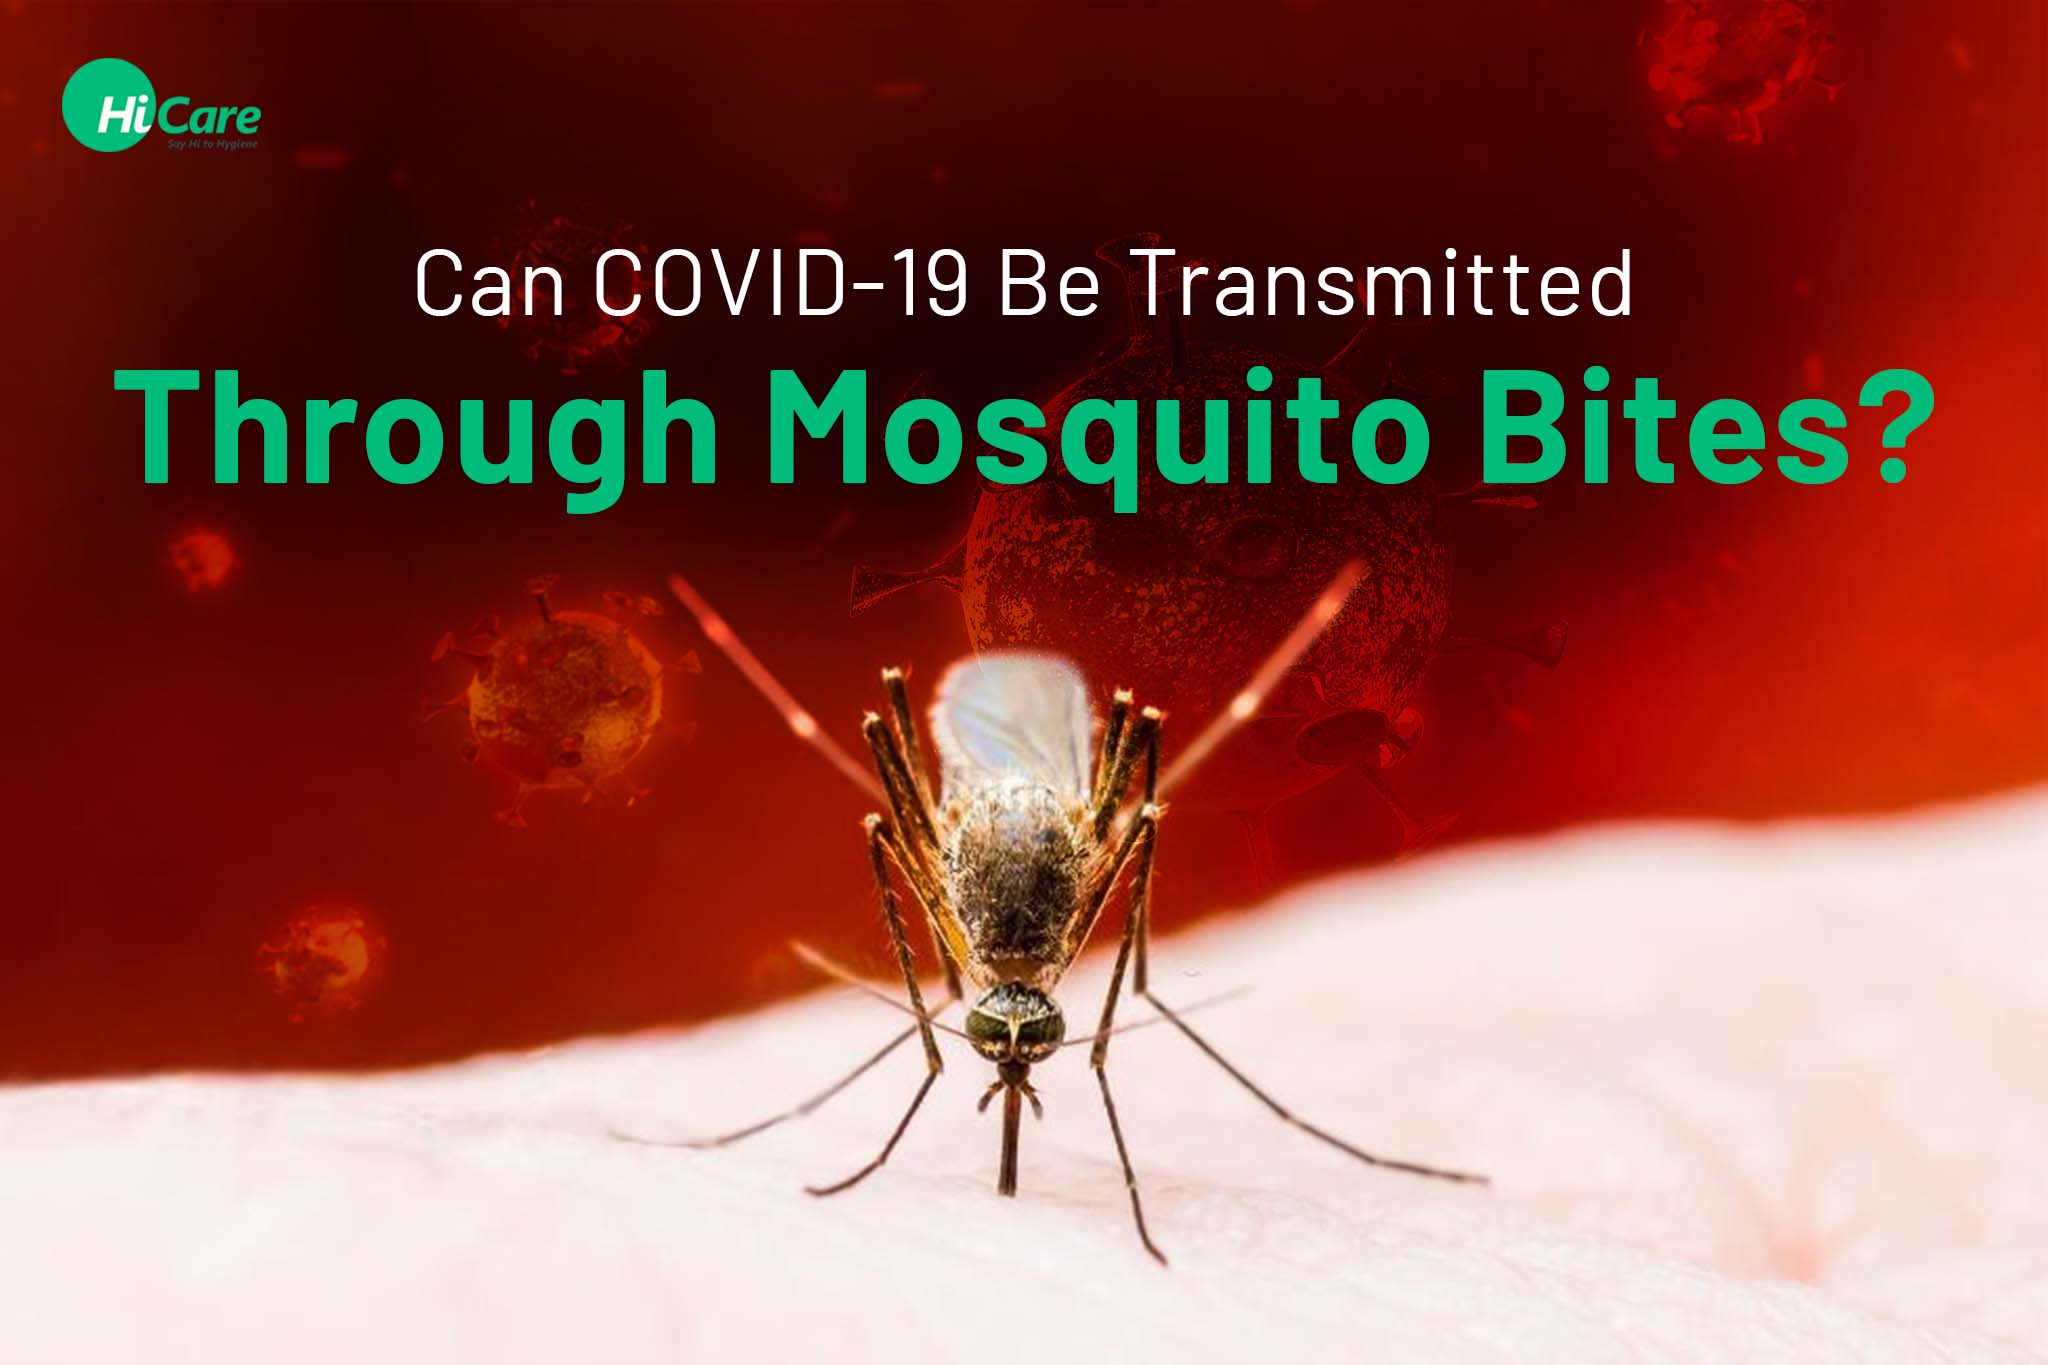 can covid-19 be transmitted through mosquito bites